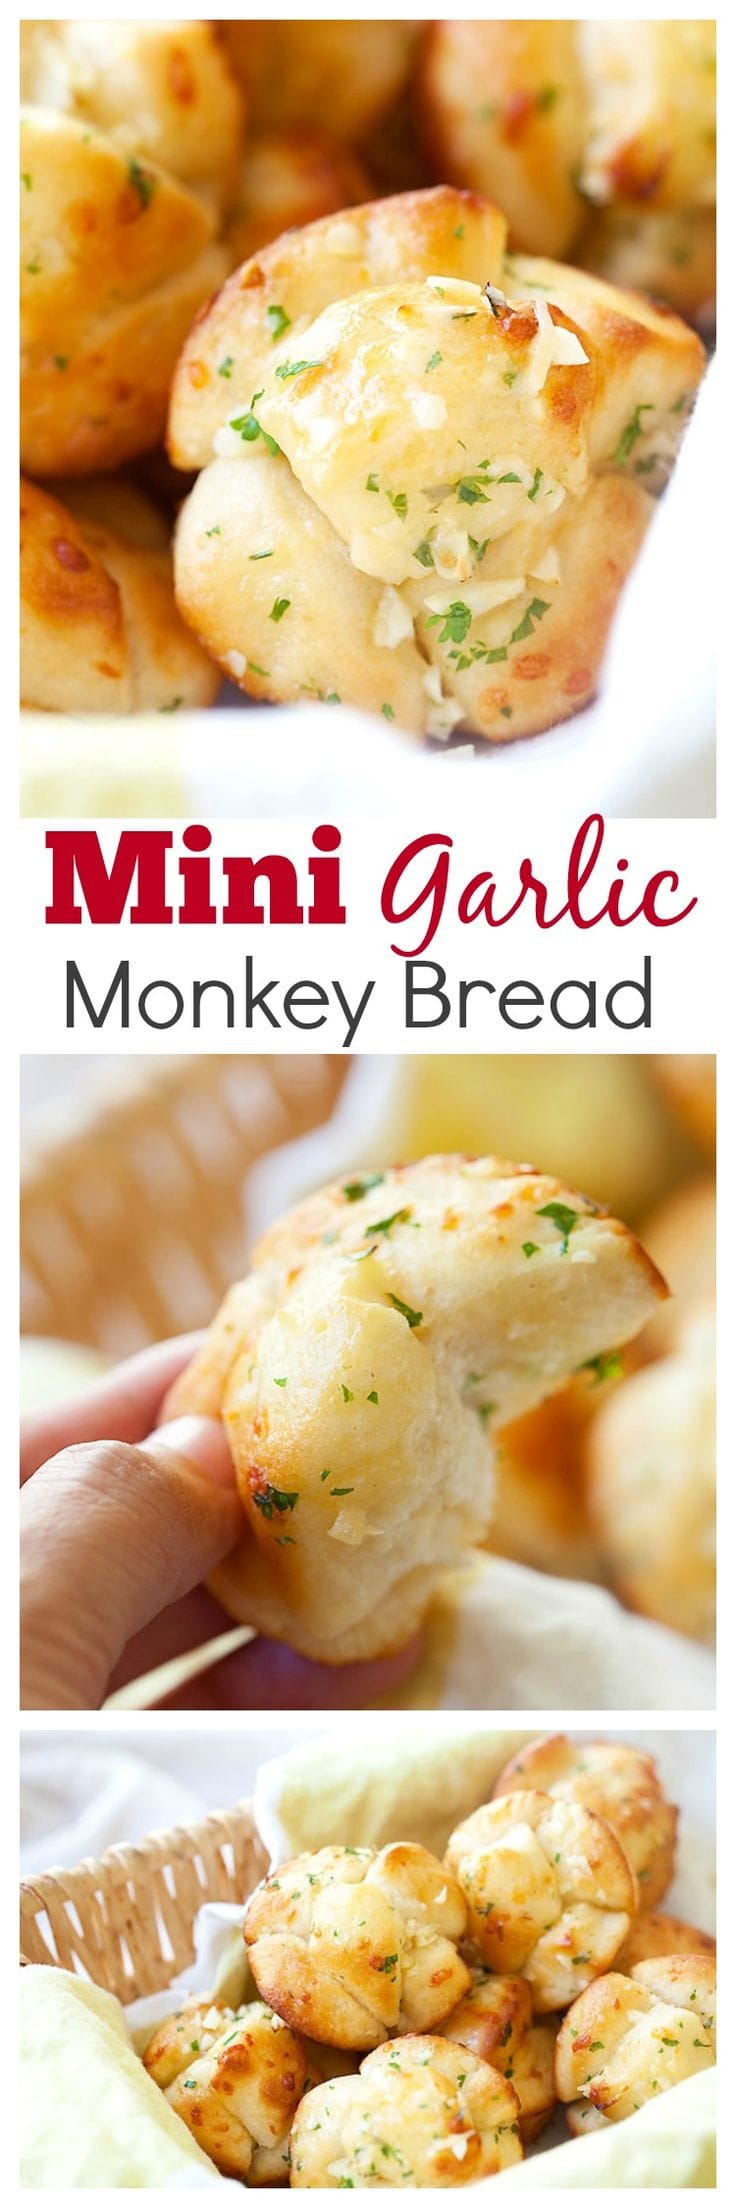 Mini garlic monkey bread – best and easiest monkey bread takes 20 mins! Use Pillsbury biscuits dough and garlic herb butter | rasamalaysia.com